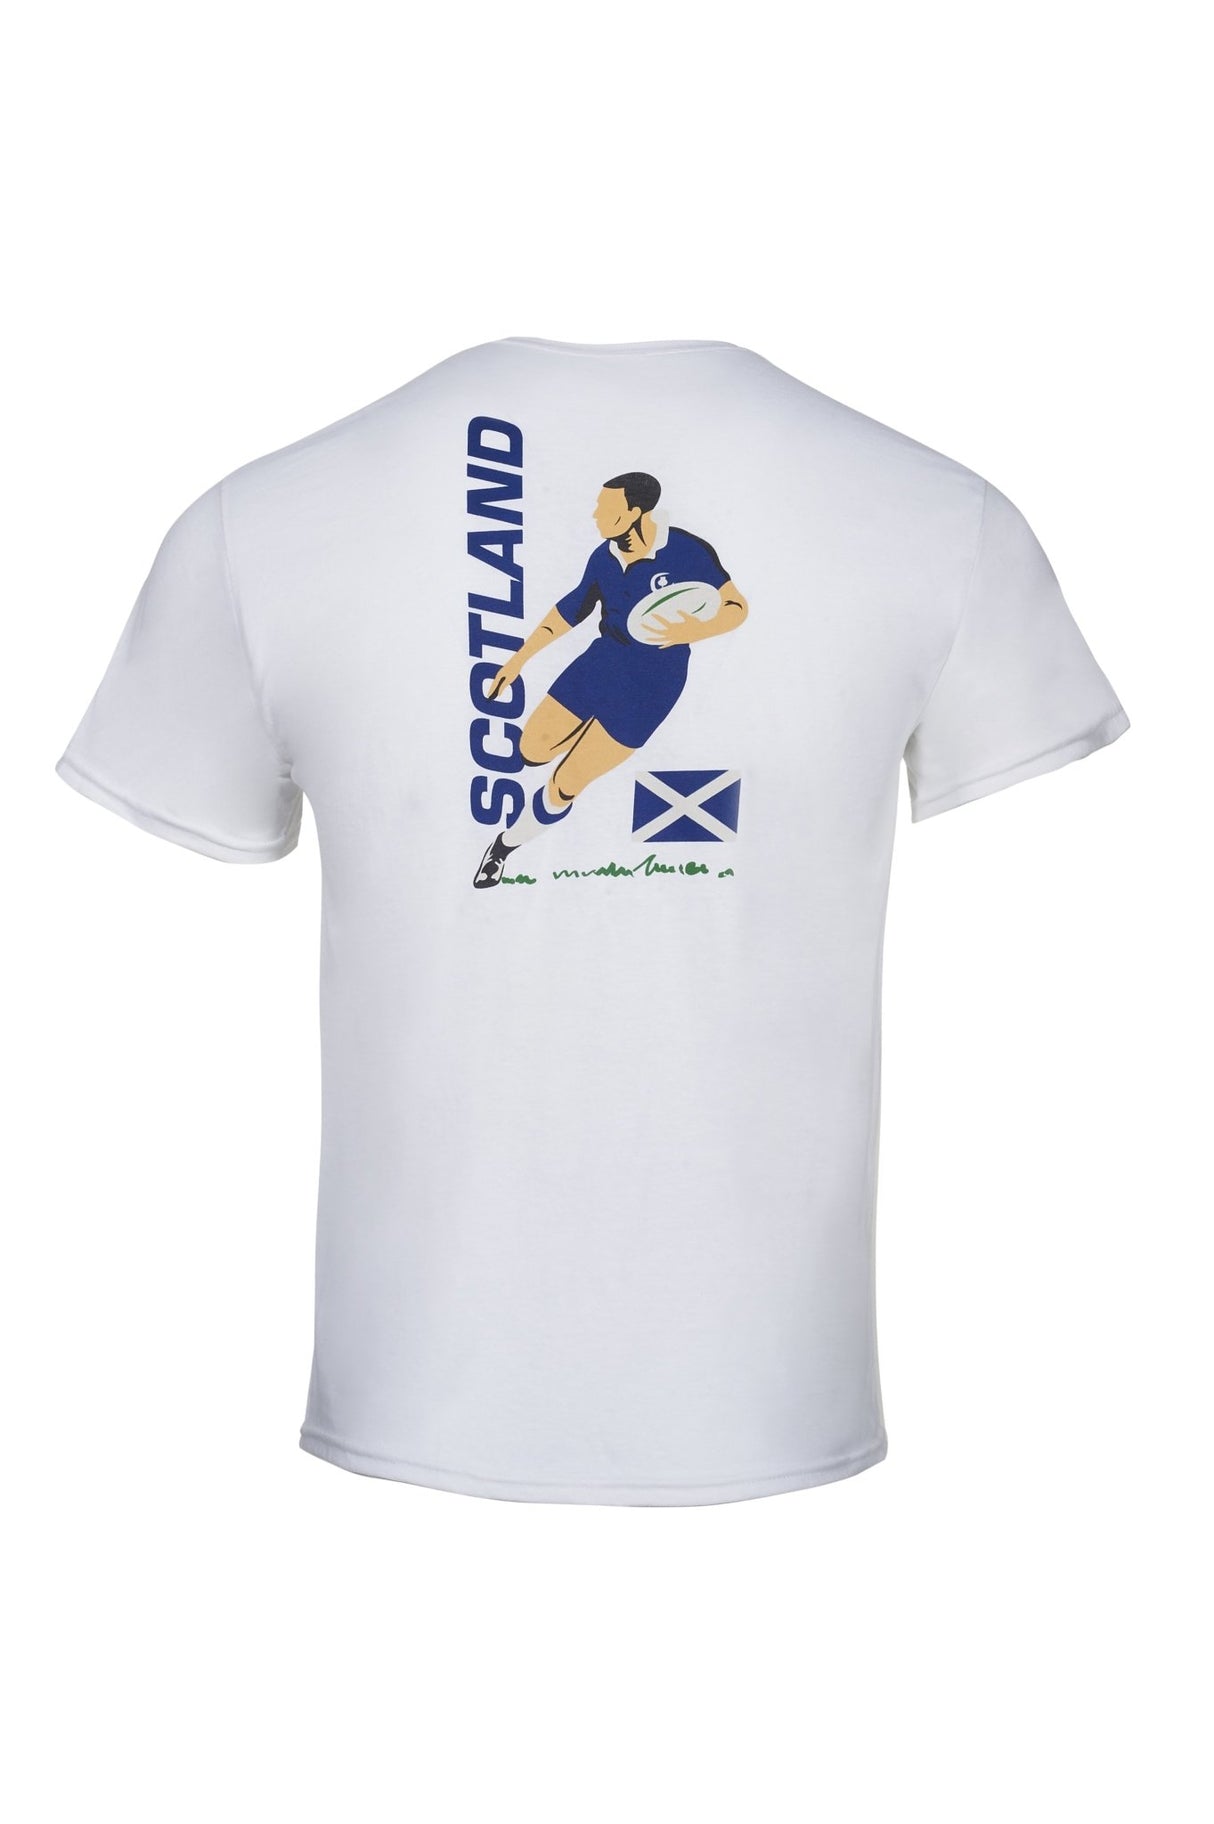 Scotland Nations Graphic T-Shirt |T-Shirt | Gainline | Absolute Rugby